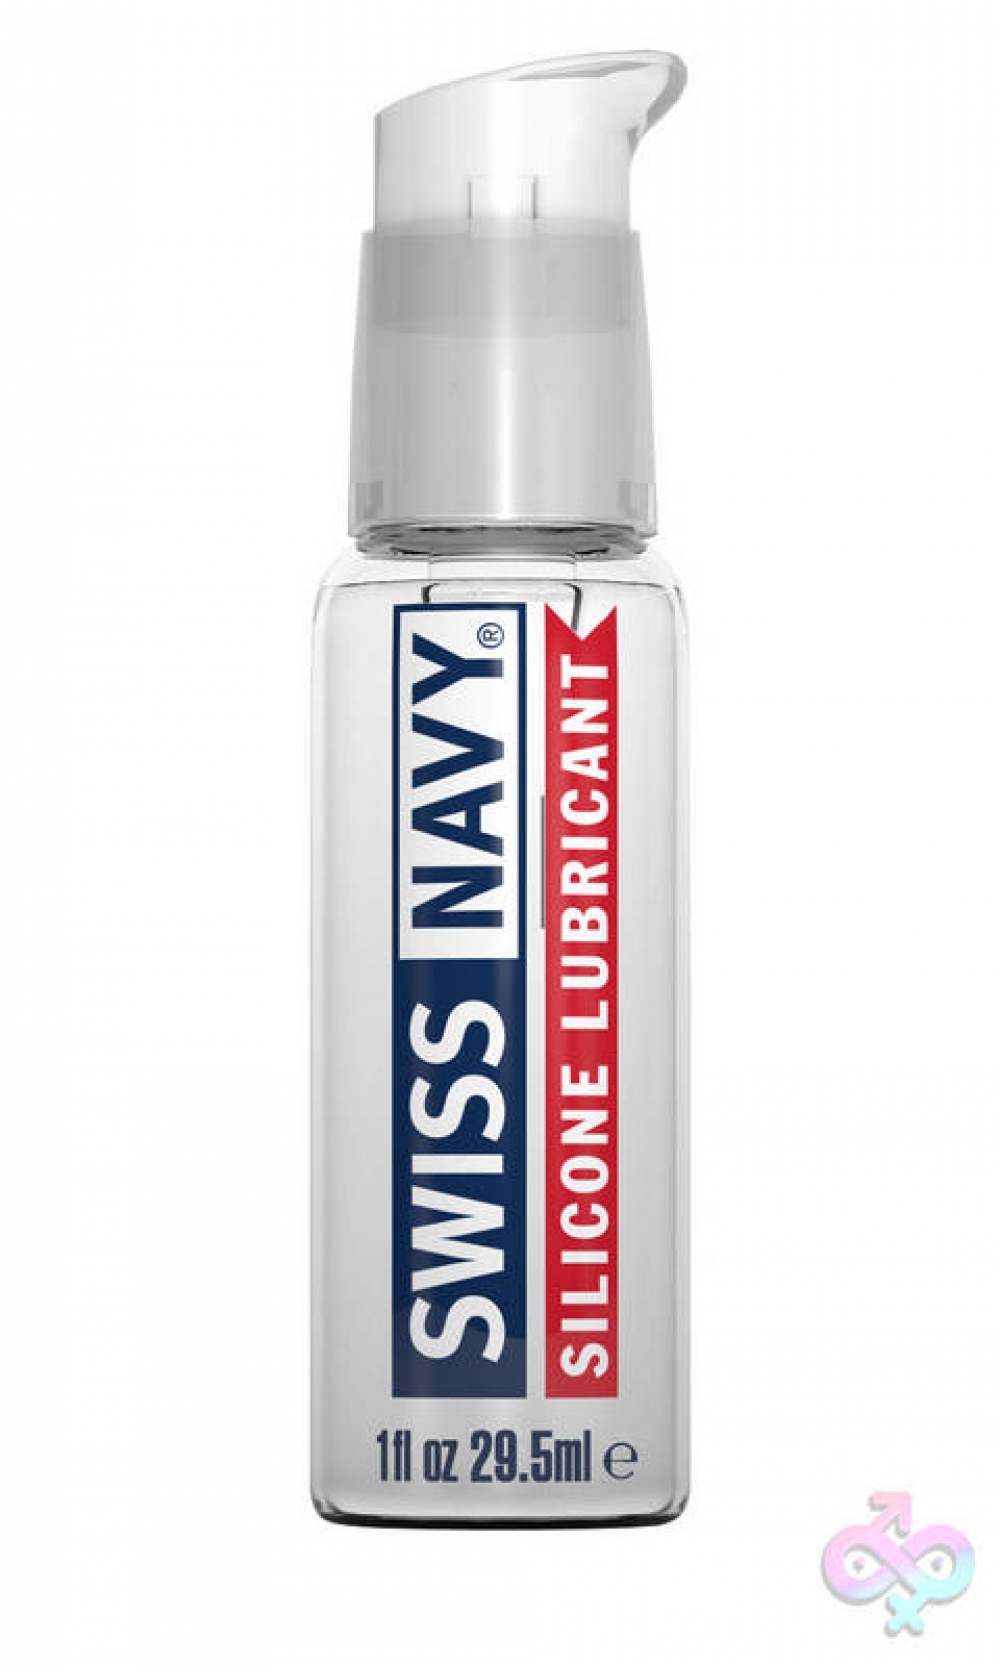 M.D. Science Lab Sex Toys - Swiss Navy Silicone Based Lubricant 1 Oz 29.5ml